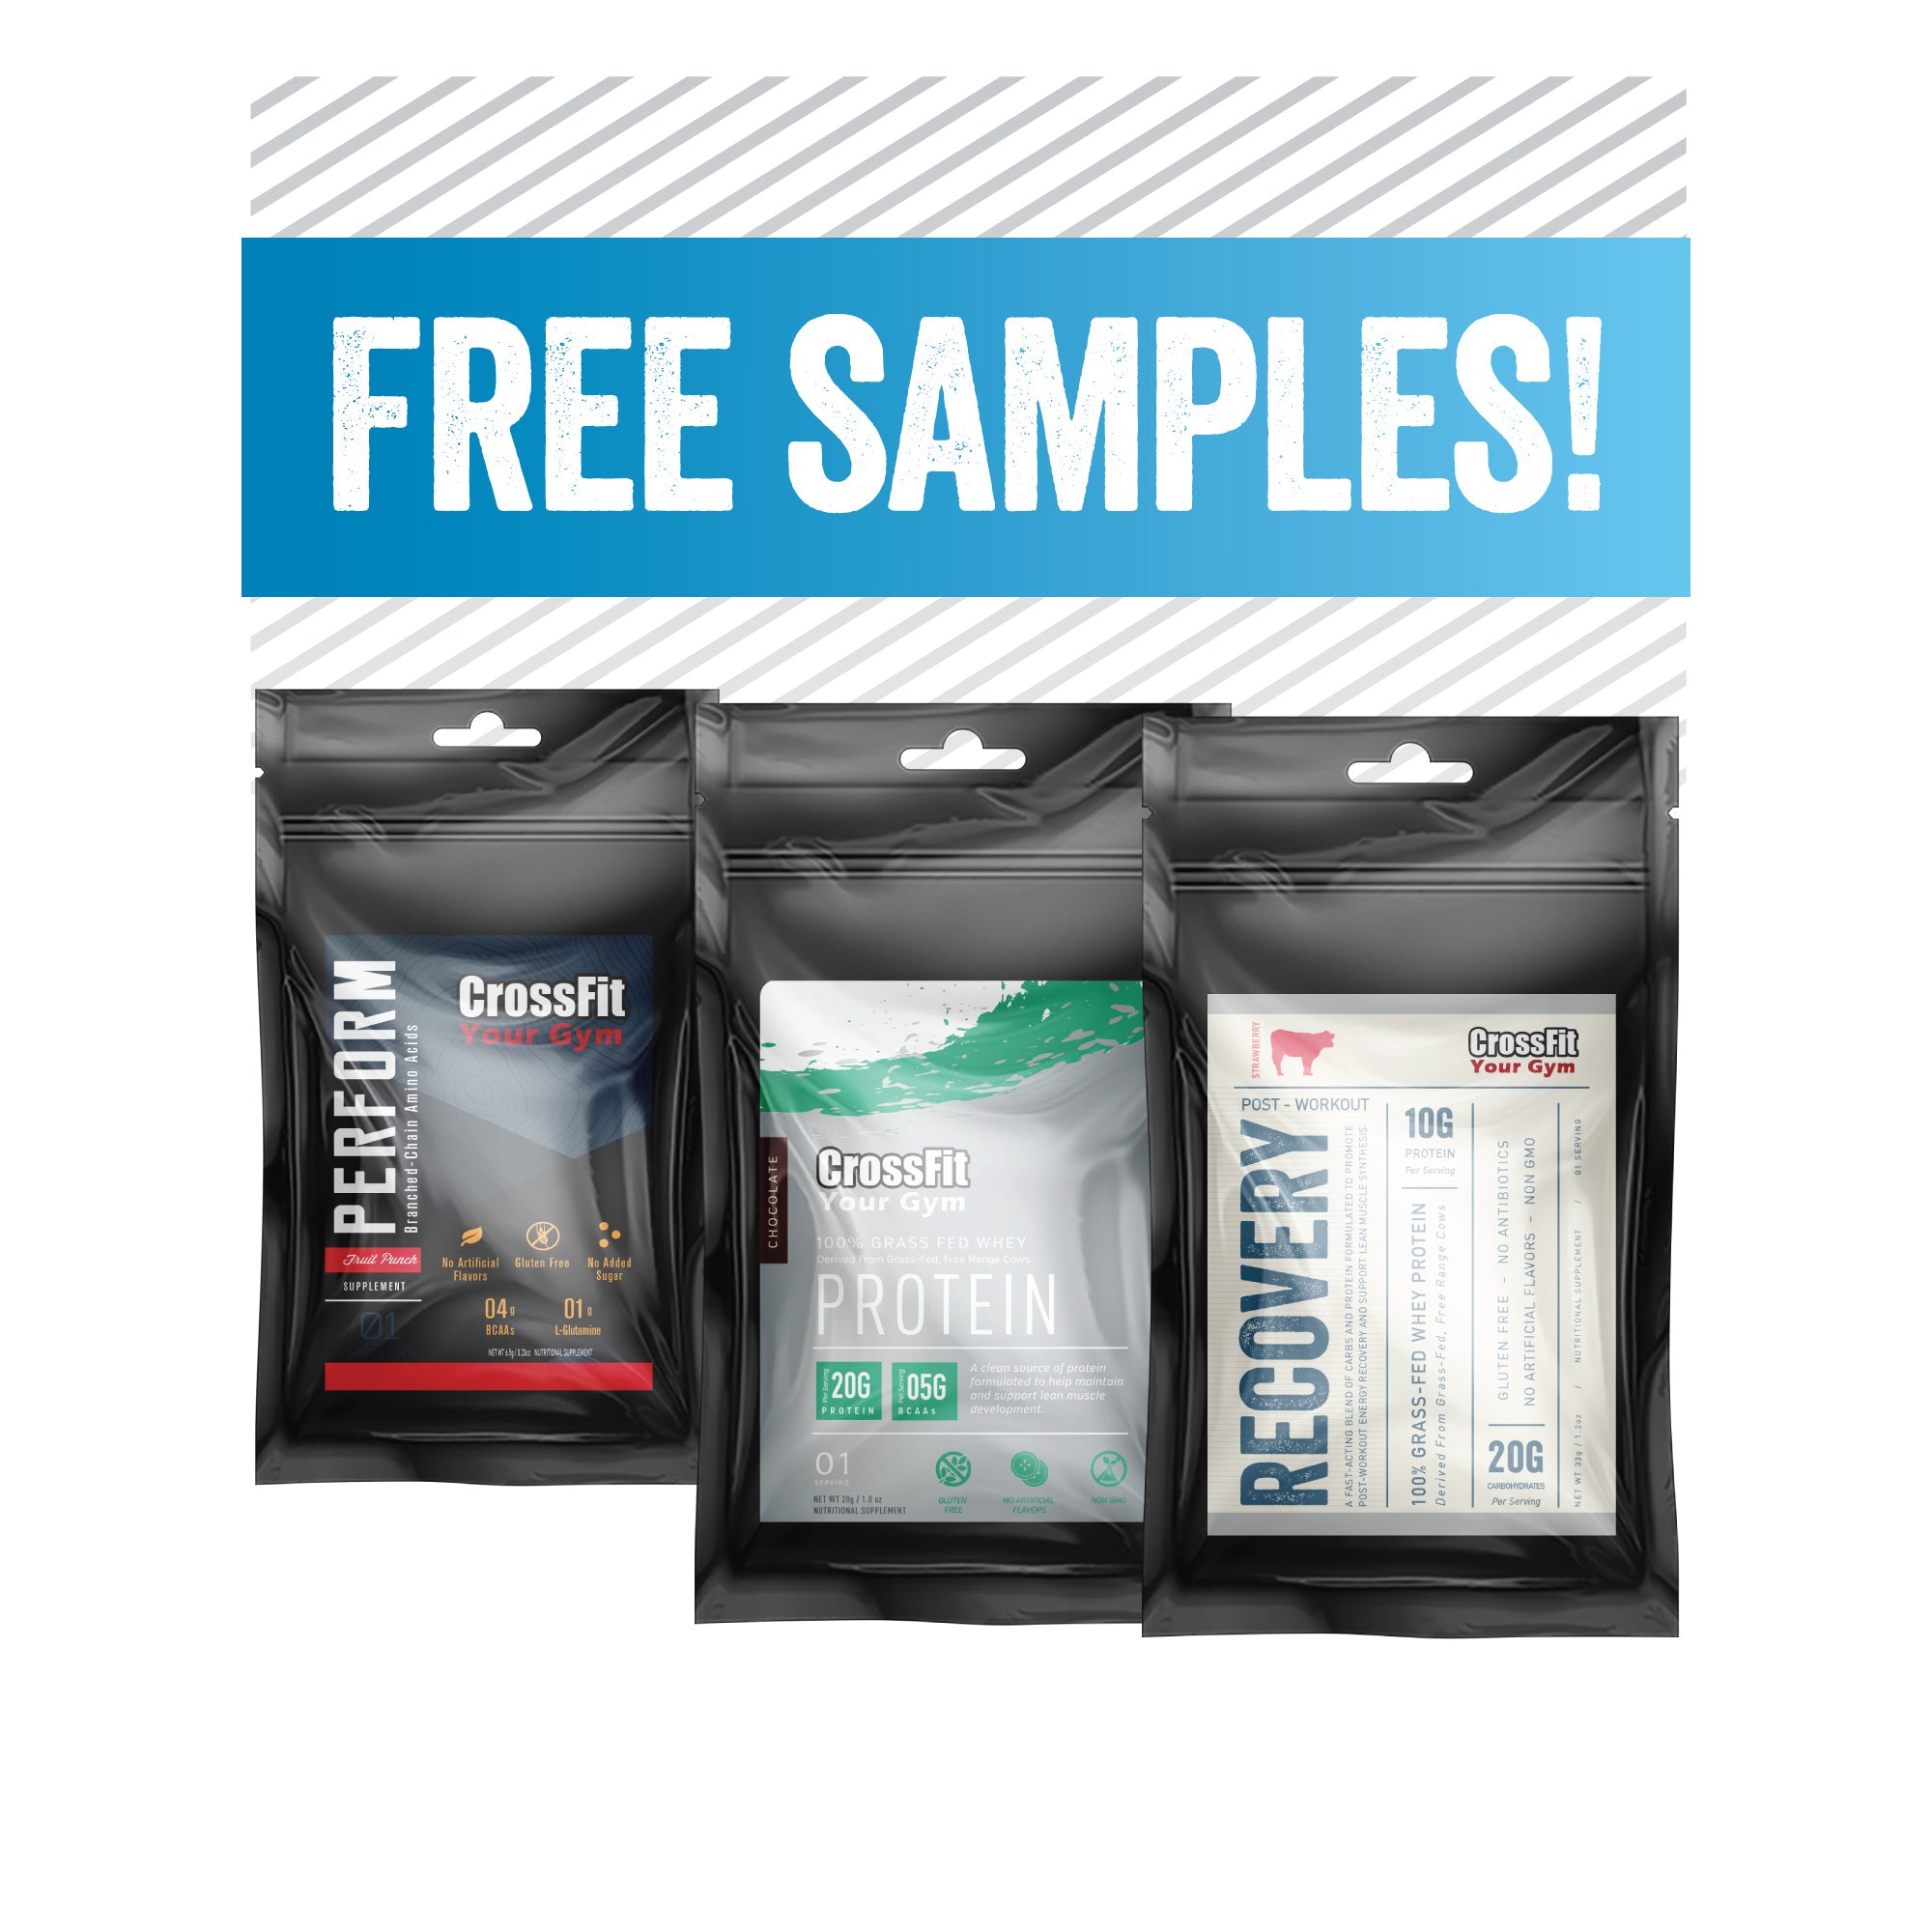 Supplement samples for free